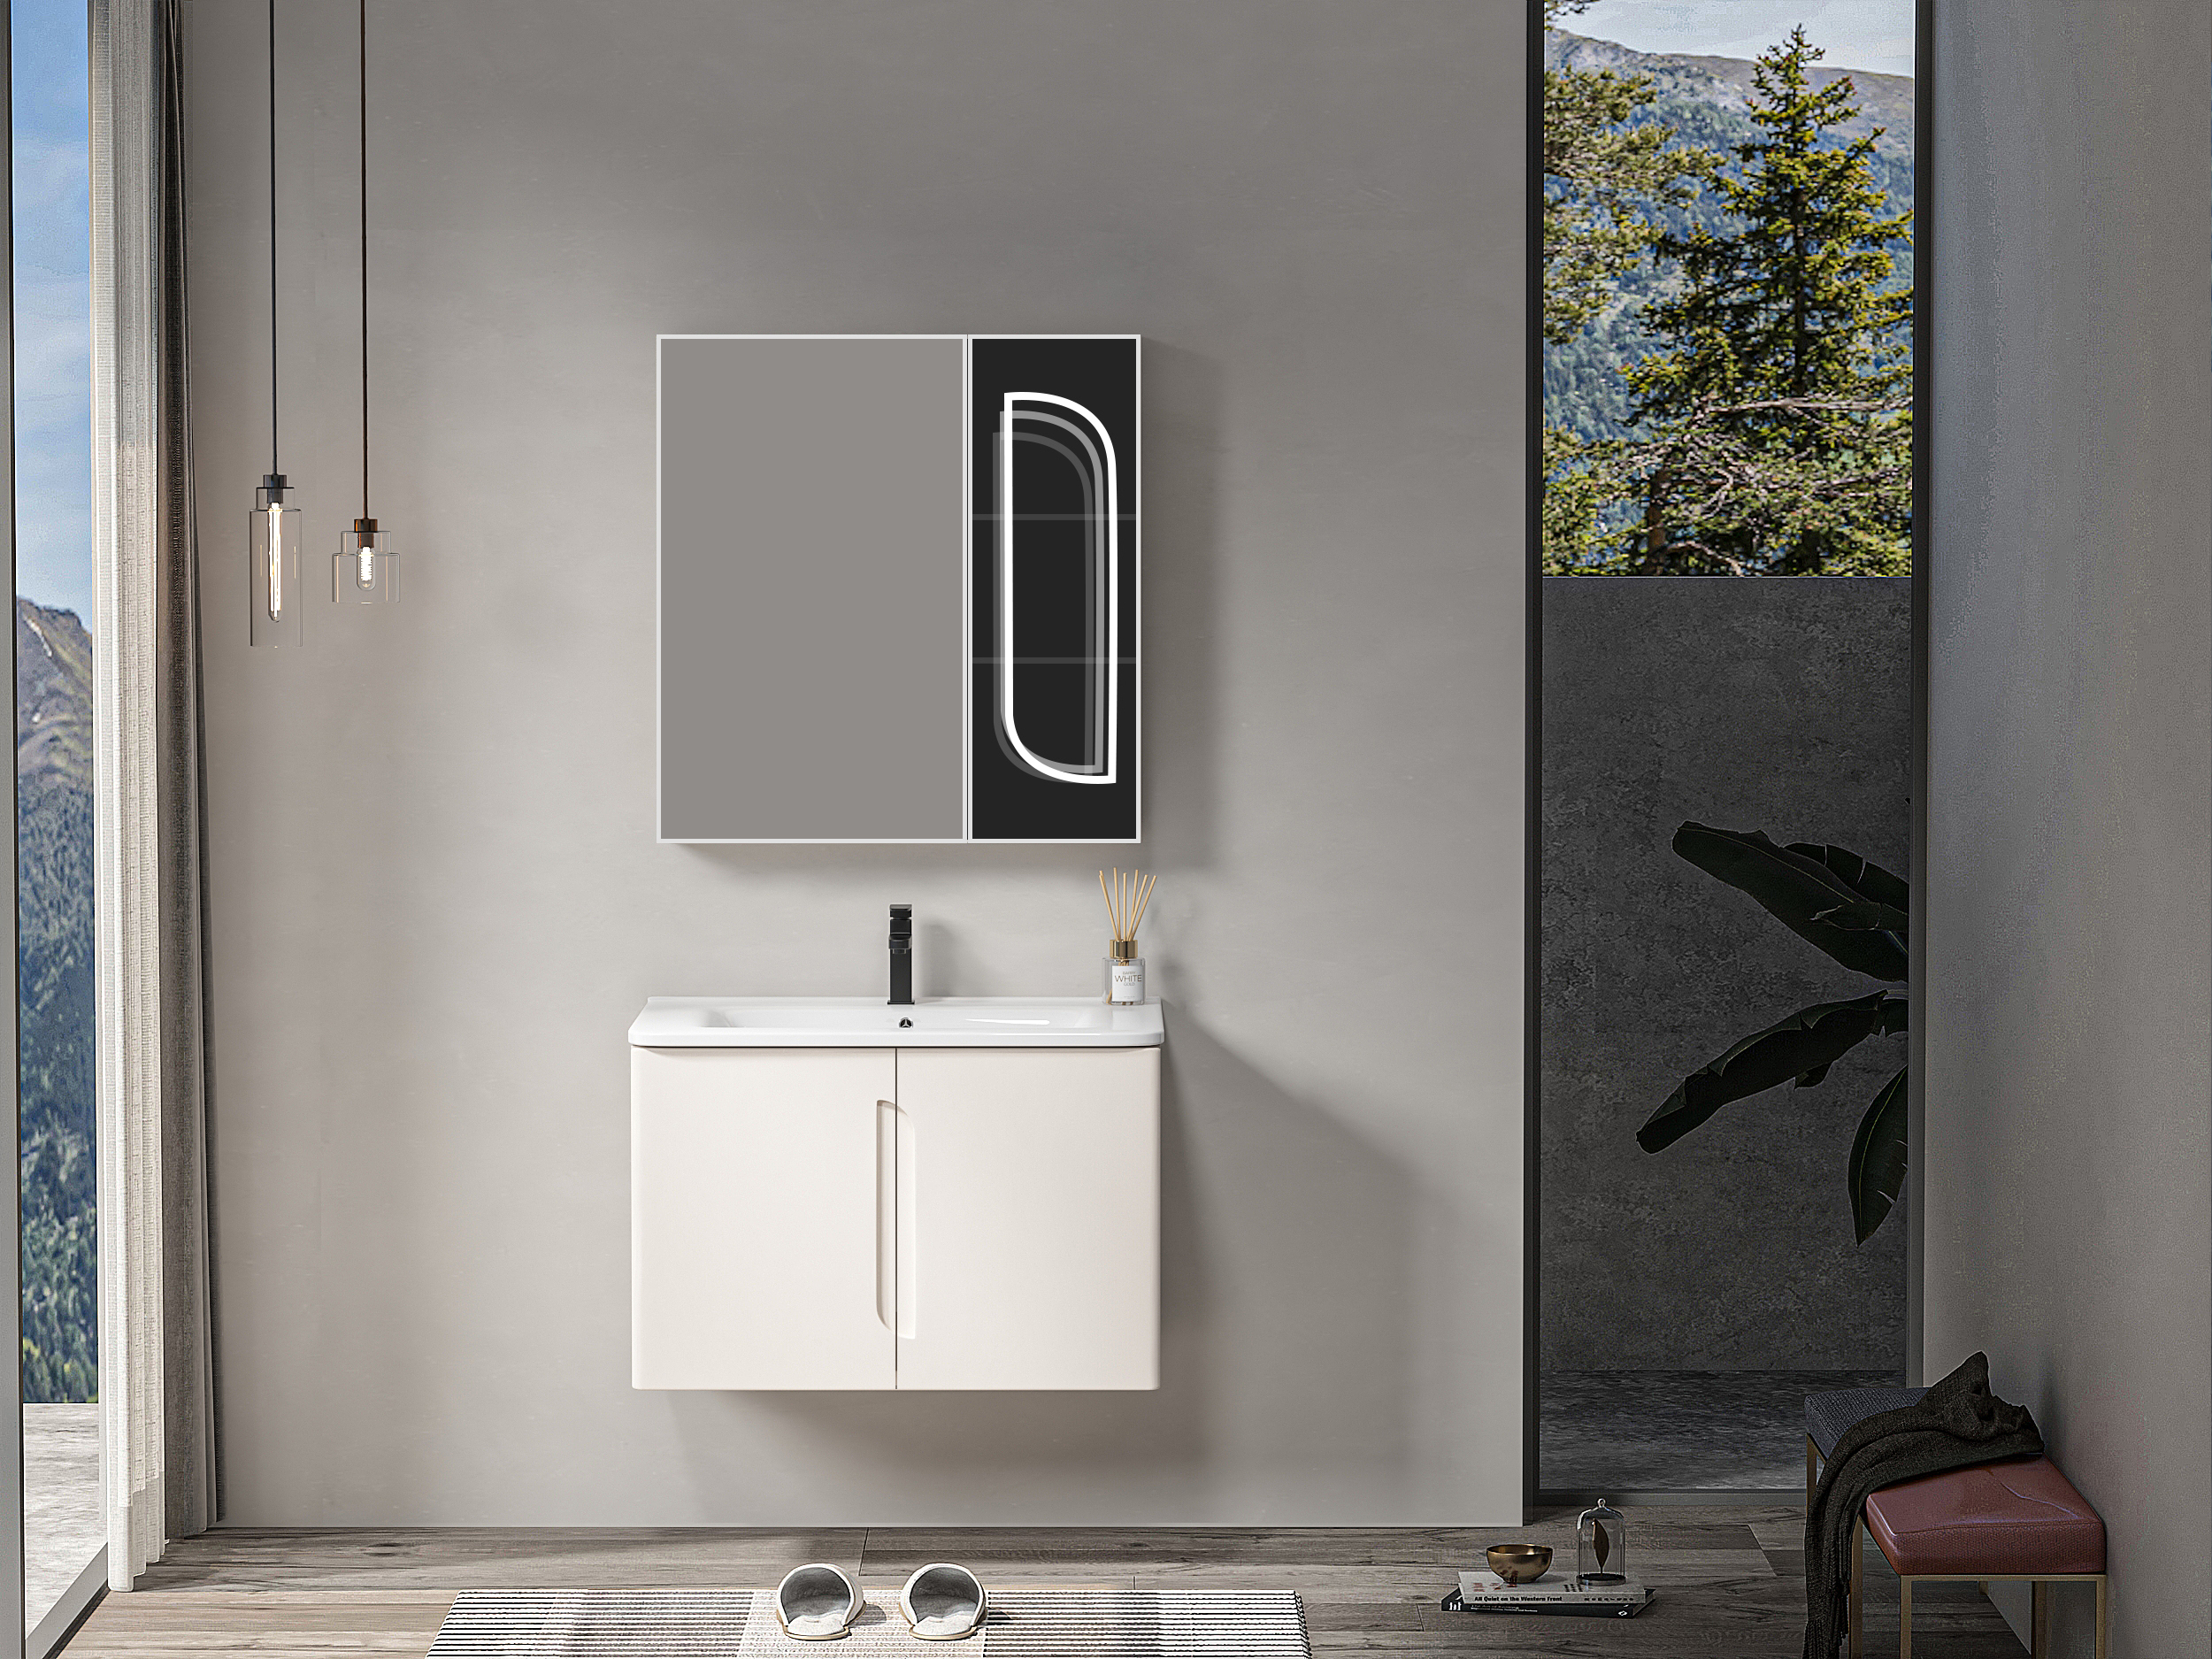 Aigao Sanitary Ware: Add intelligence and comfort to your home life